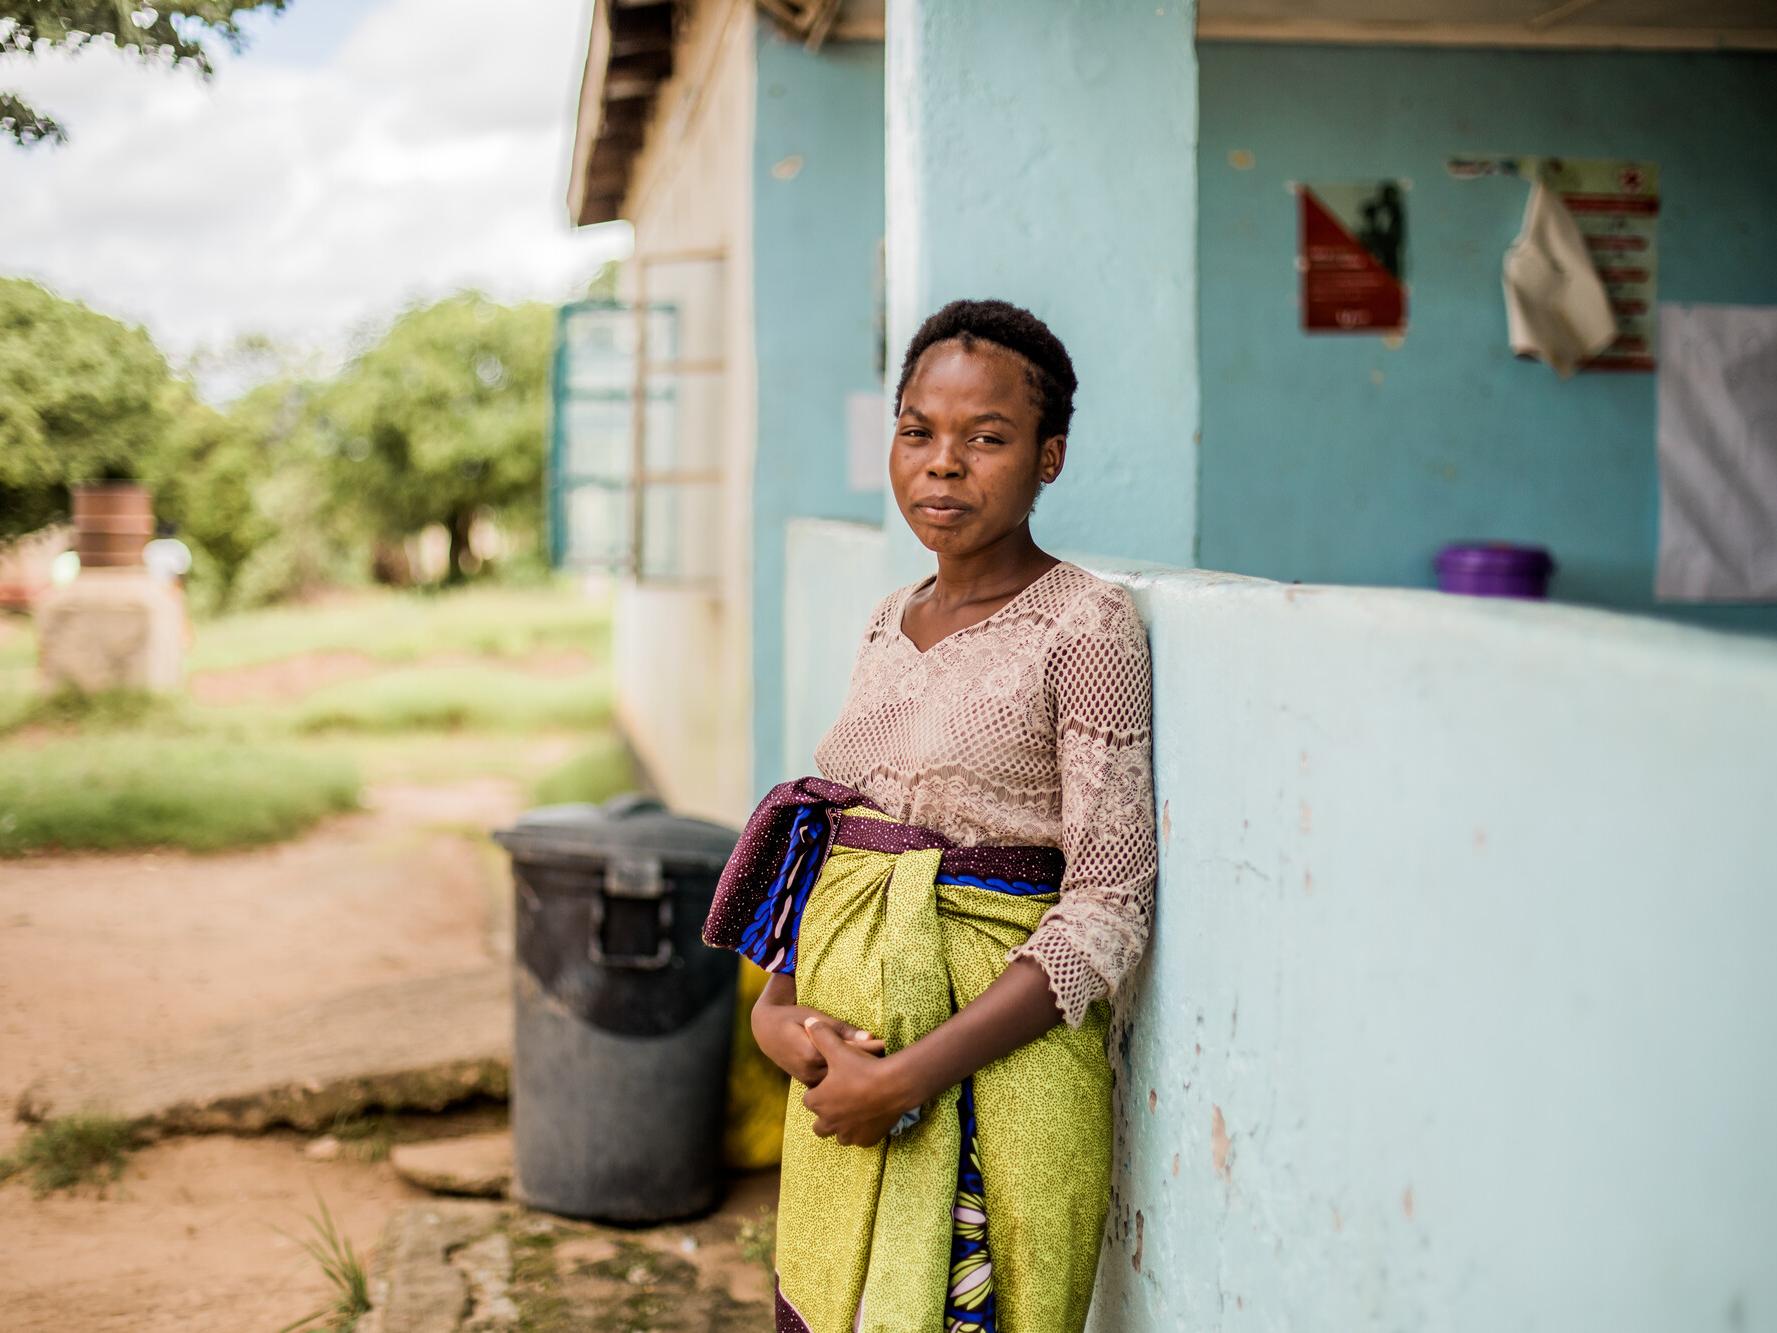 Keira, 18, standing outside her home in Zambia